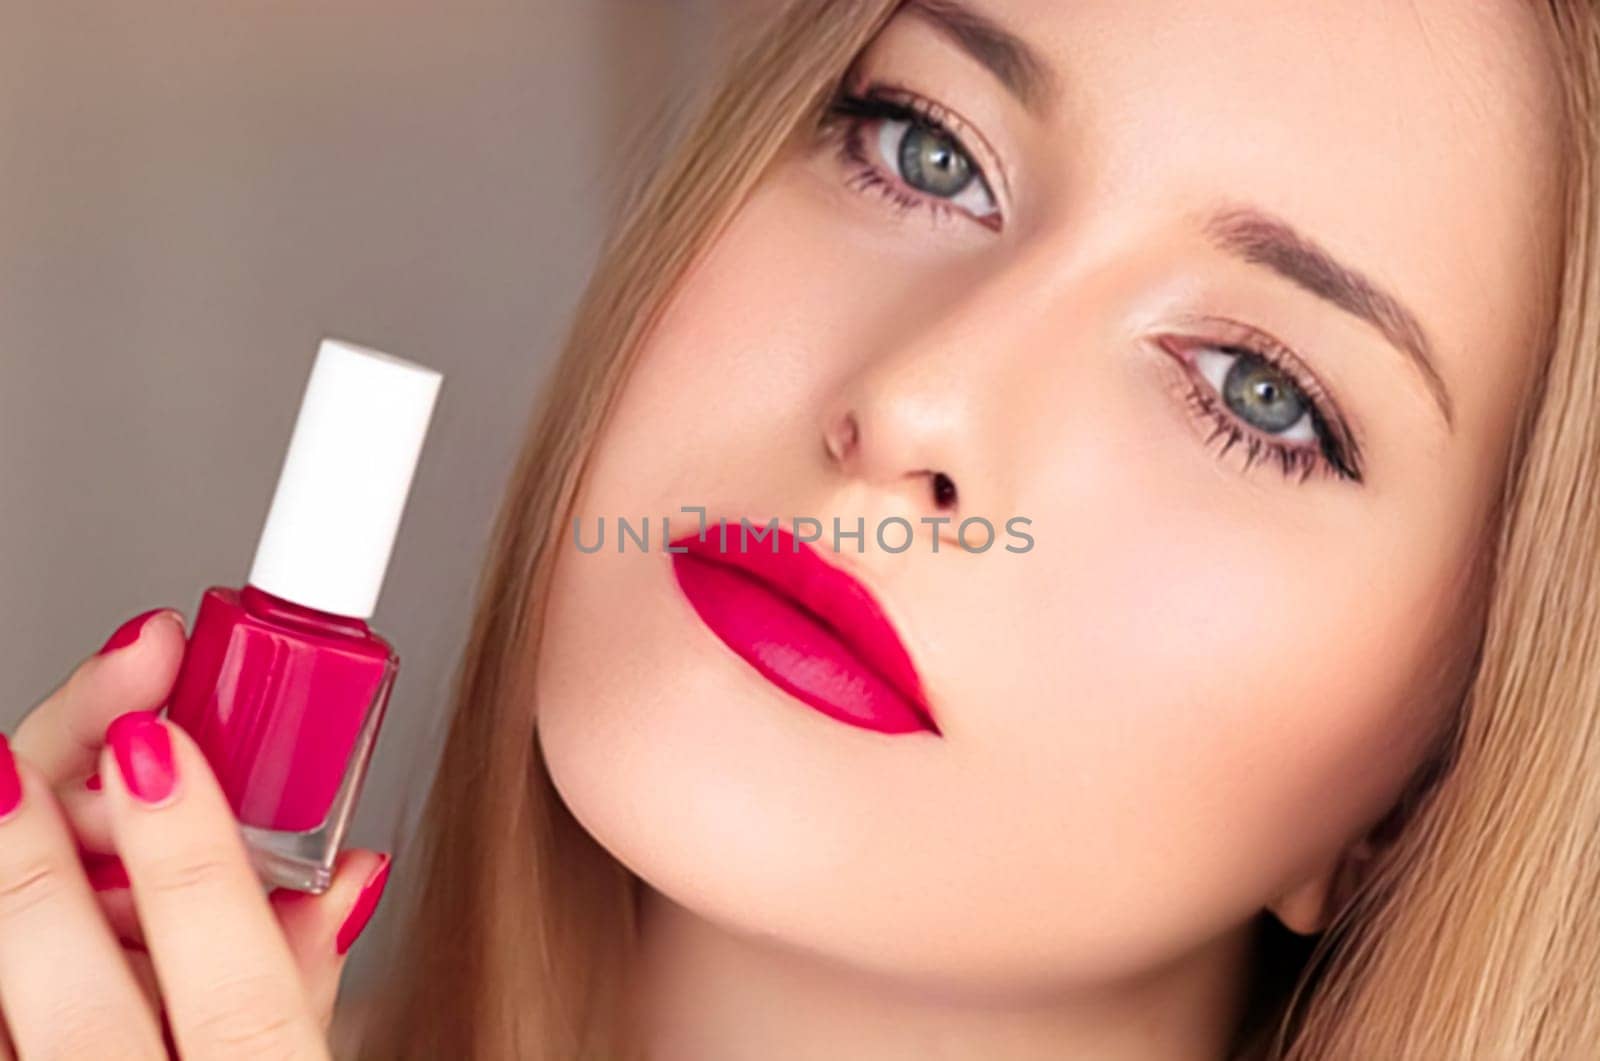 Beauty product, makeup and cosmetics, face portrait of beautiful woman with nail polish, manicure and matching pink lipstick make-up for luxury cosmetic, style and fashion by Anneleven